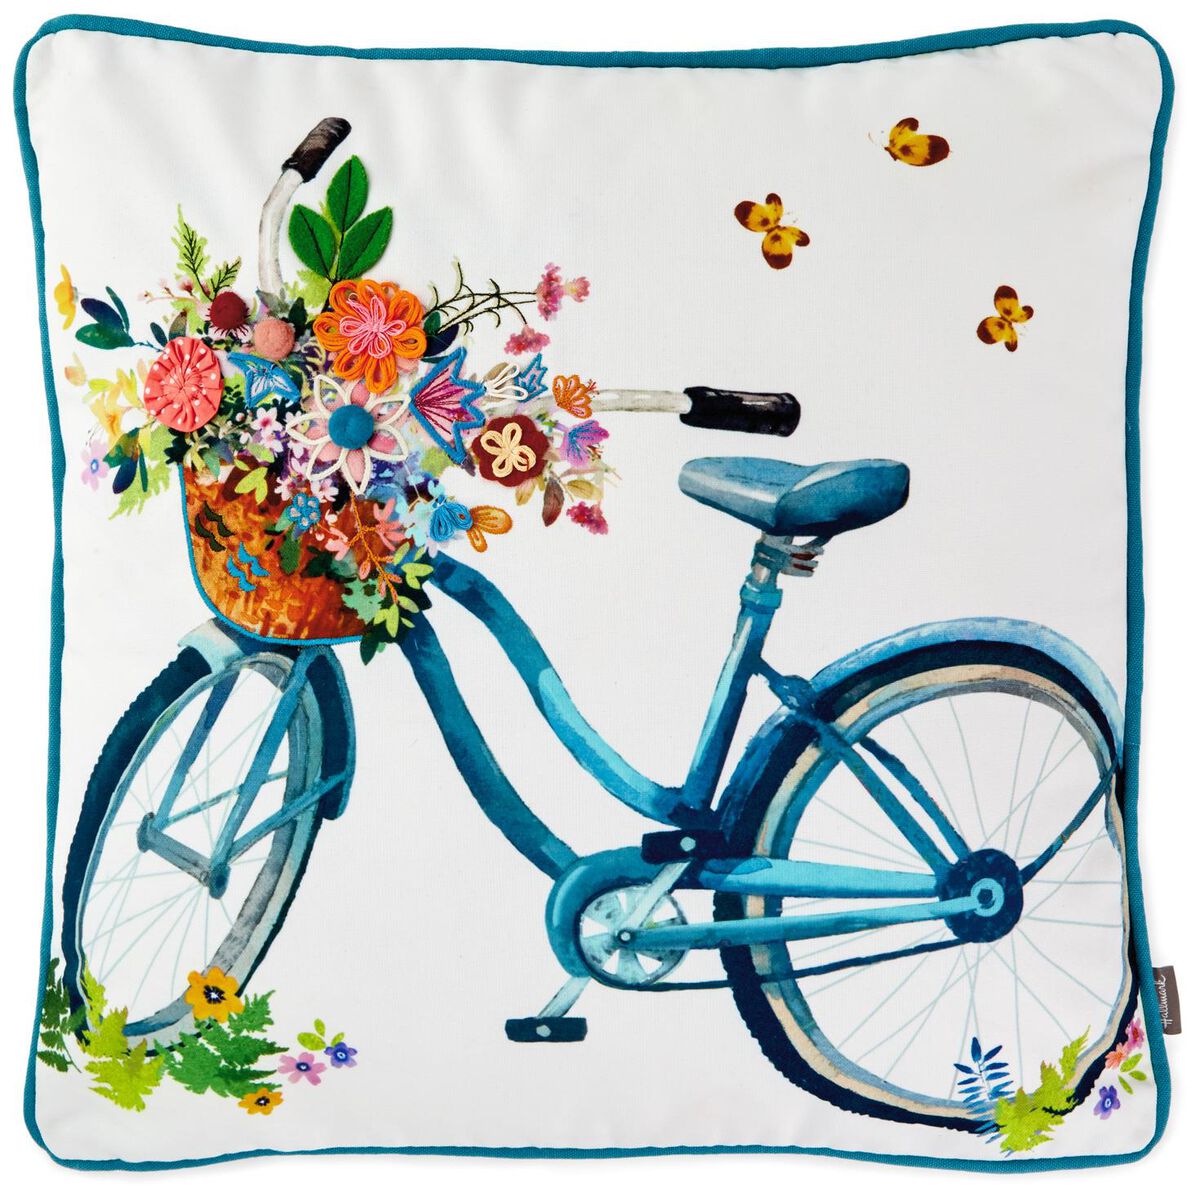 Bicycle With Flowers Throw Pillow, 18x18 - Pillows & Blankets - Hallmark